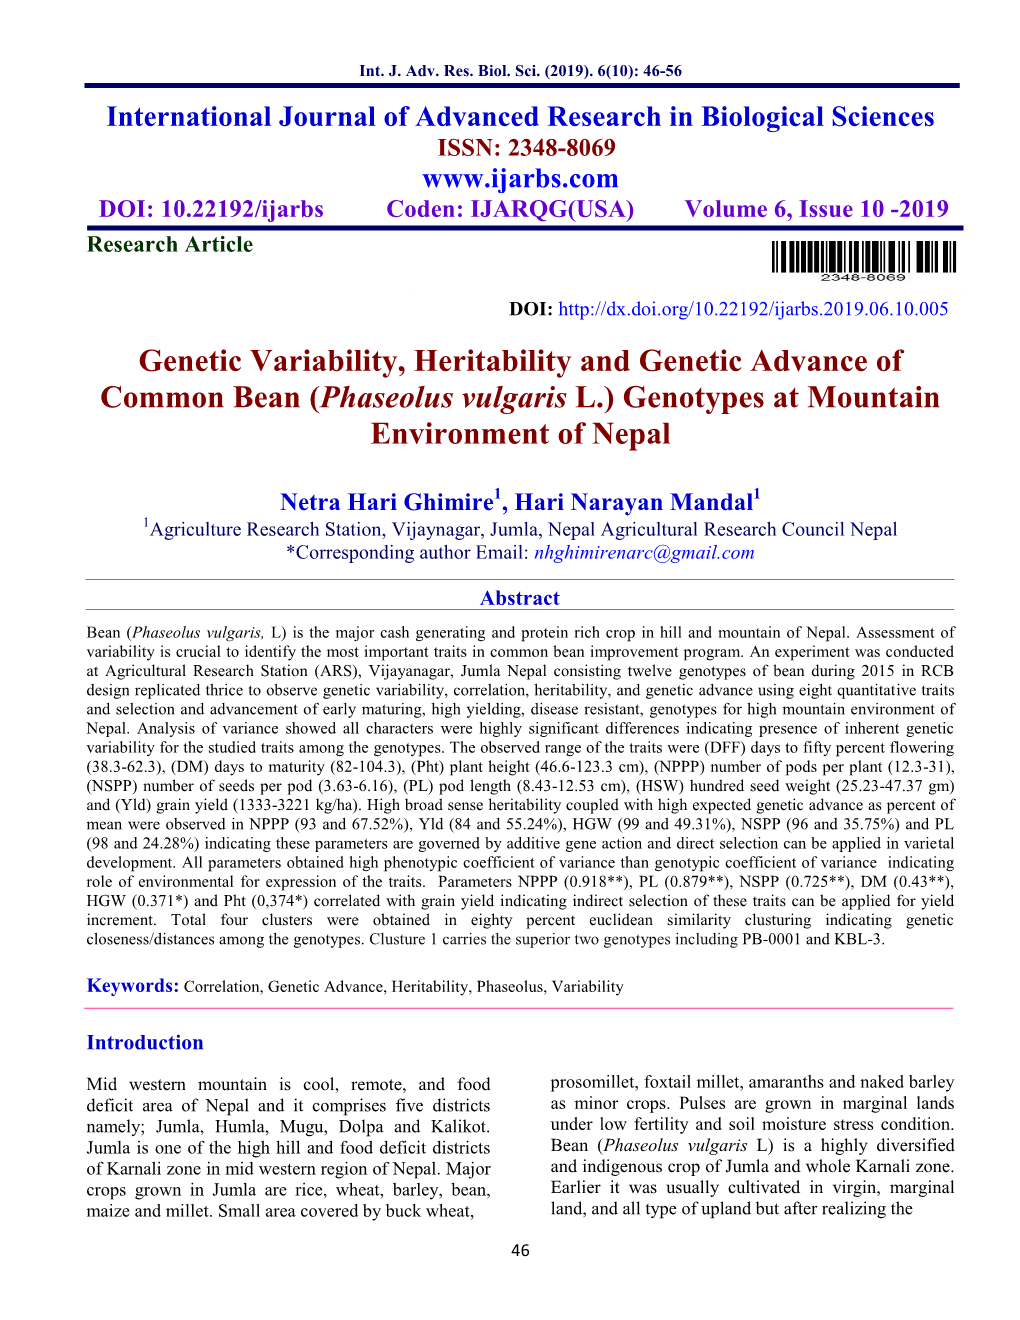 Genetic Variability, Heritability and Genetic Advance of Common Bean (Phaseolus Vulgaris L.) Genotypes at Mountain Environment of Nepal